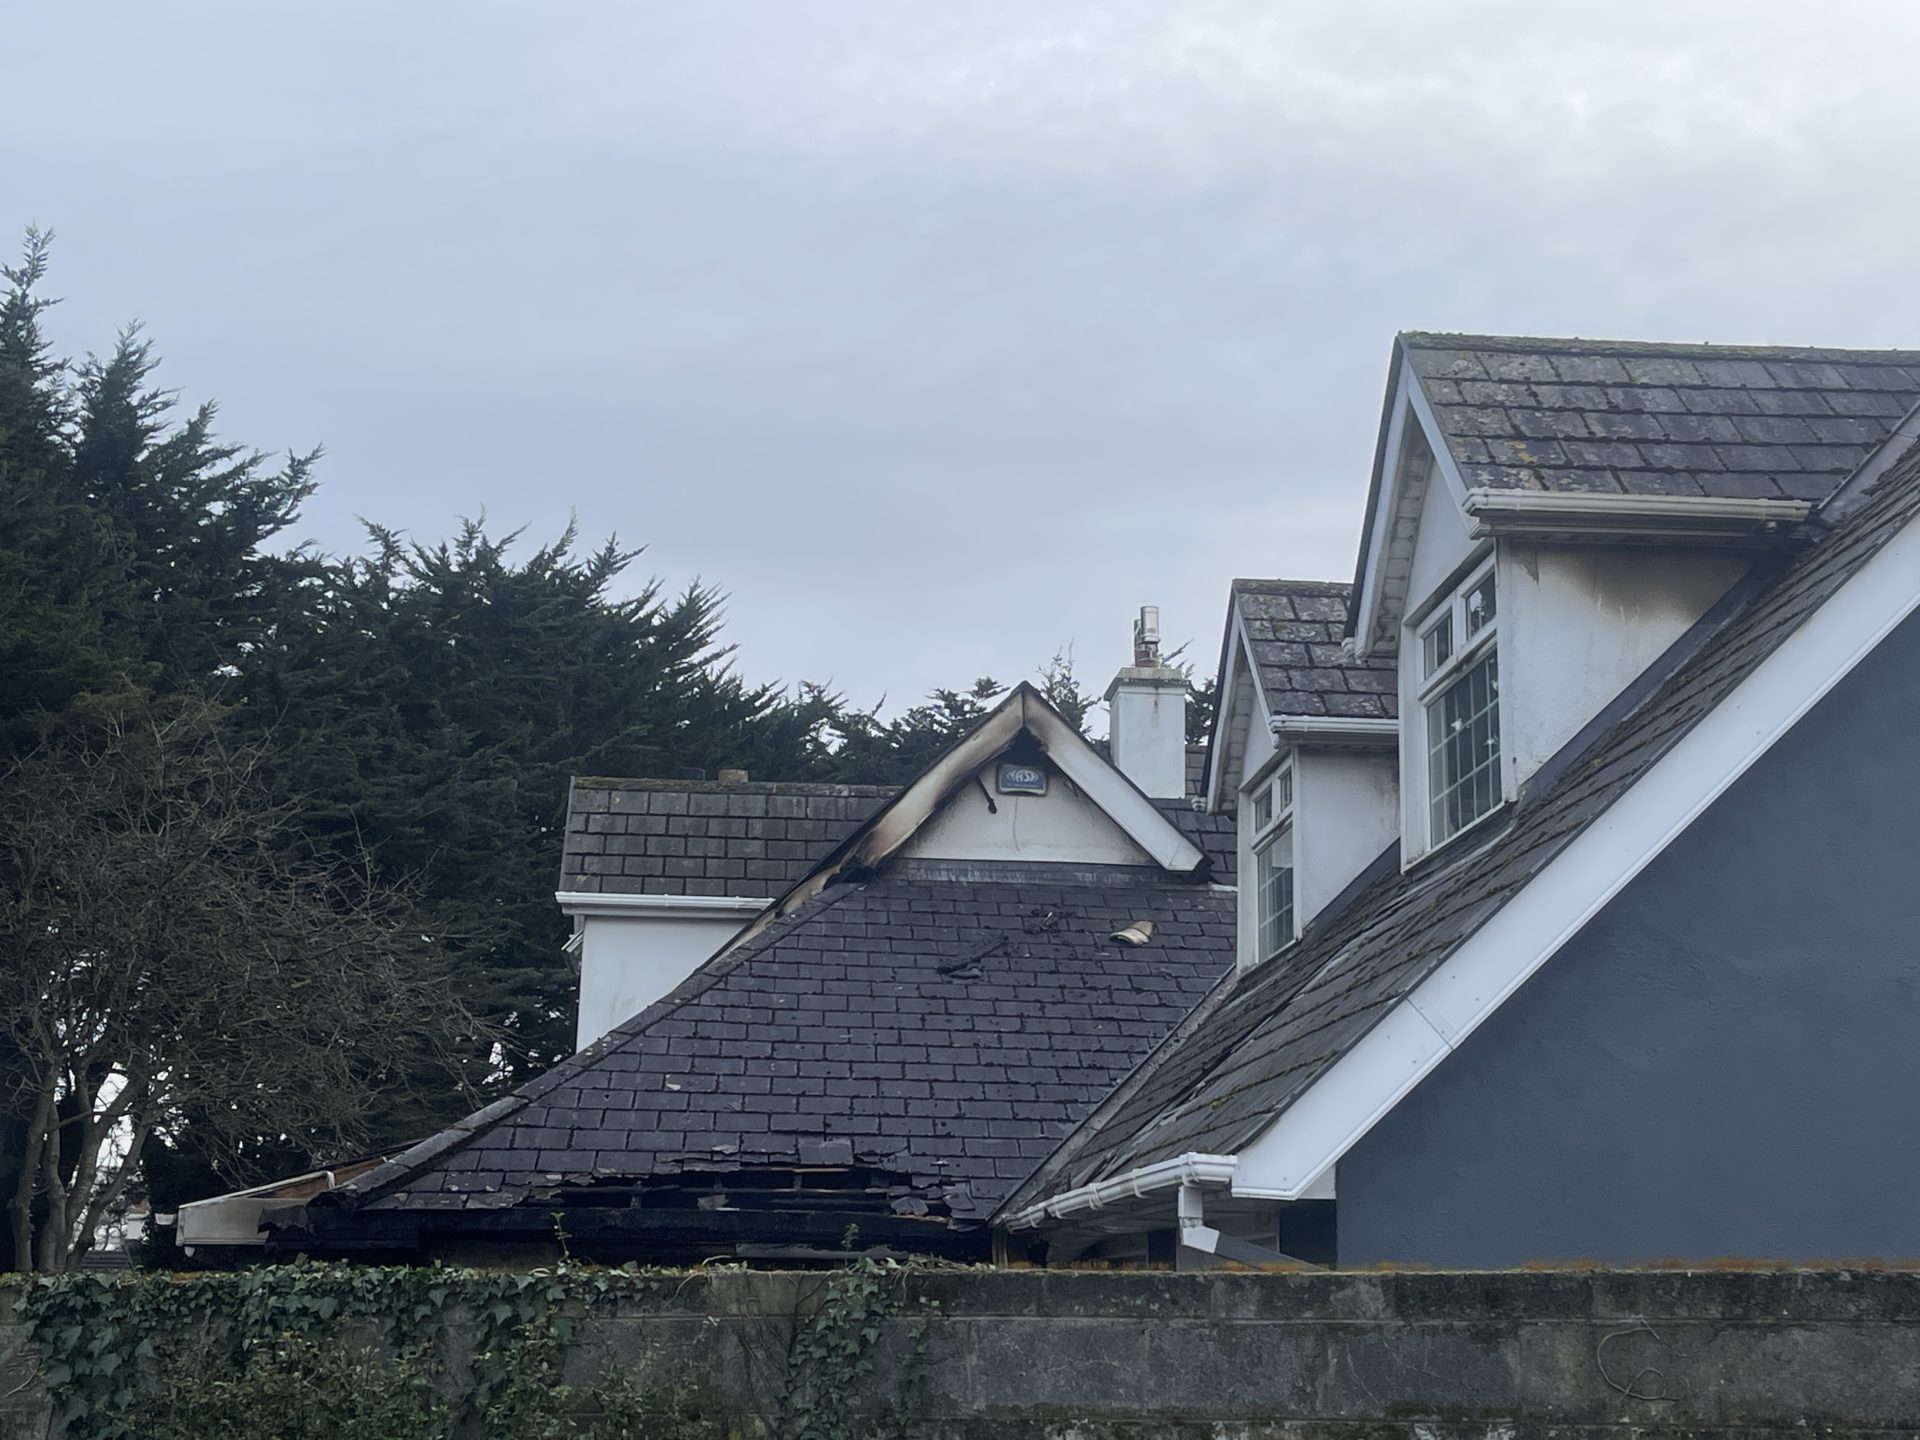 Property after suspected arson attack in Kildare. 